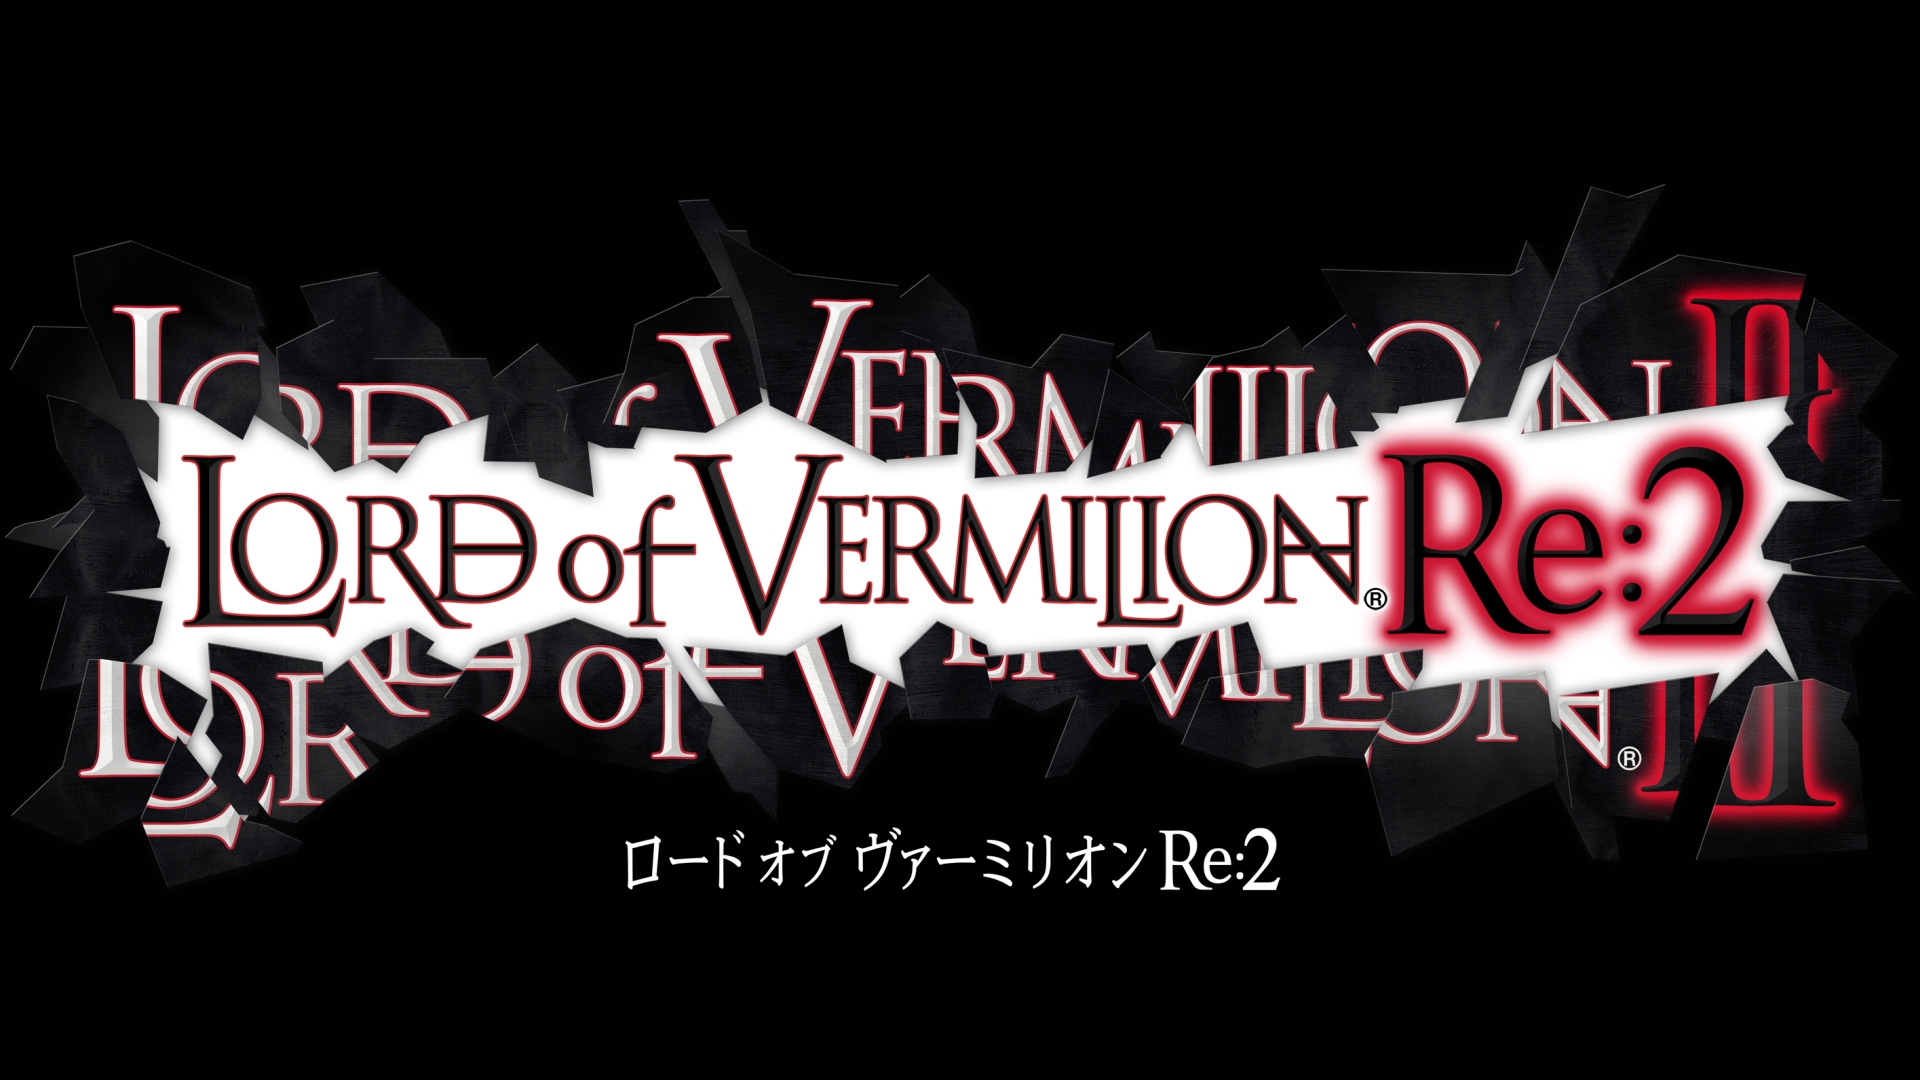 Lord of Vermilion Re:2 Logo